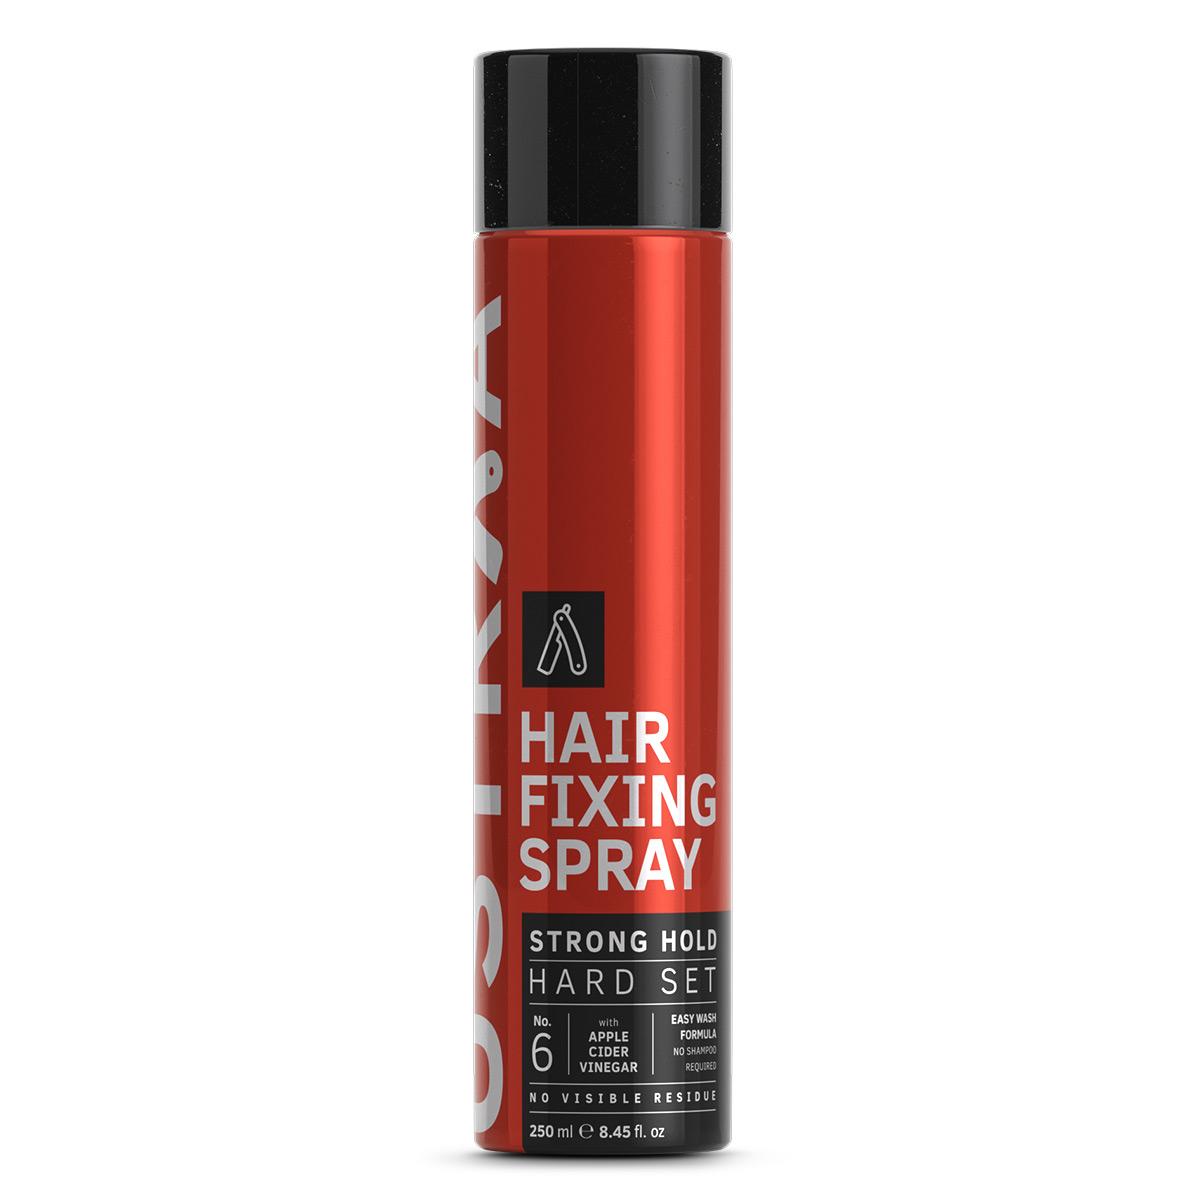 Ustraa Hair Fixing Spray For Men (250ml) | A Long Lasting Hair Spray with Extreme Hold